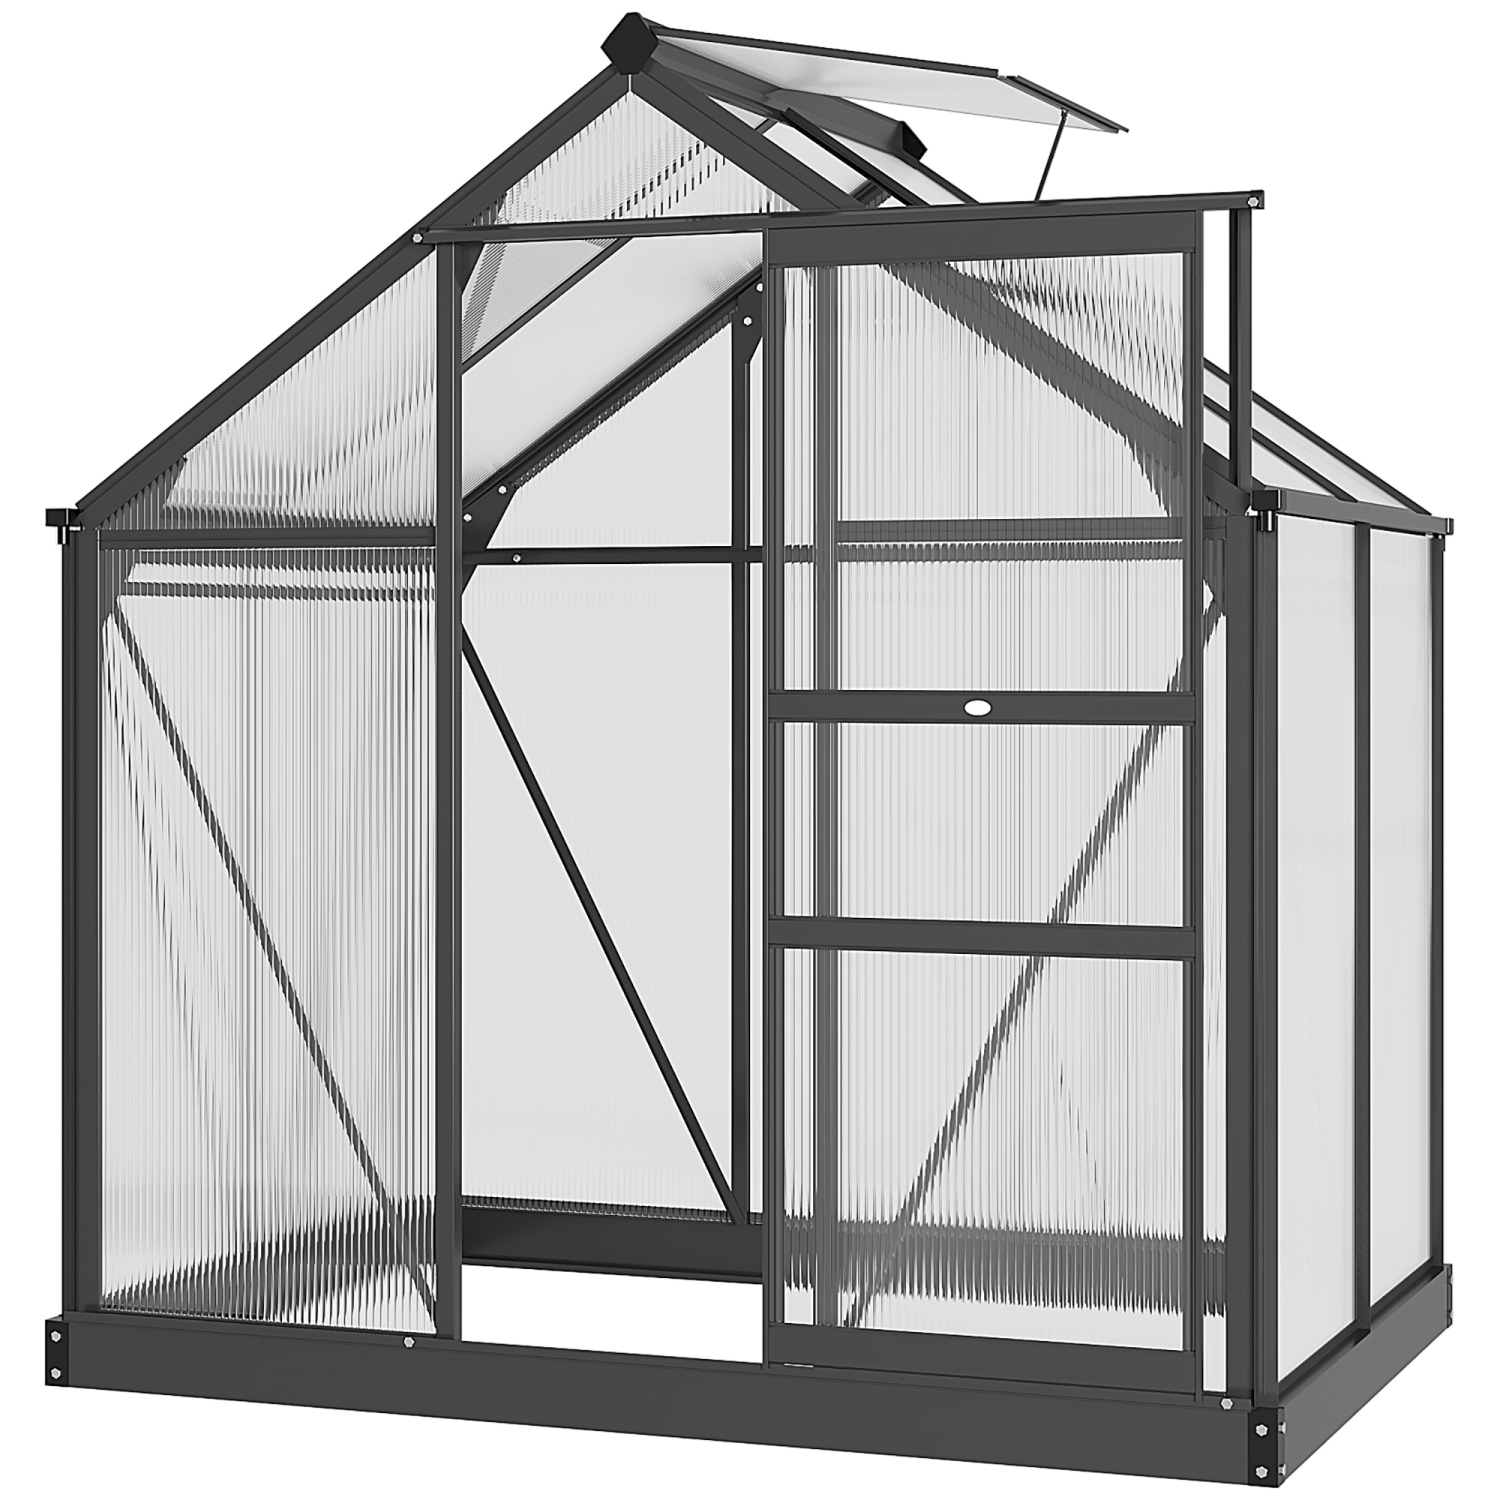 Outsunny 6' x 4' Clear Polycarbonate Greenhouse Walk-In Green House Garden Plants Grow Galvanized Base Aluminum Frame with Rain Gutter, Vent and Sliding Door, Grey